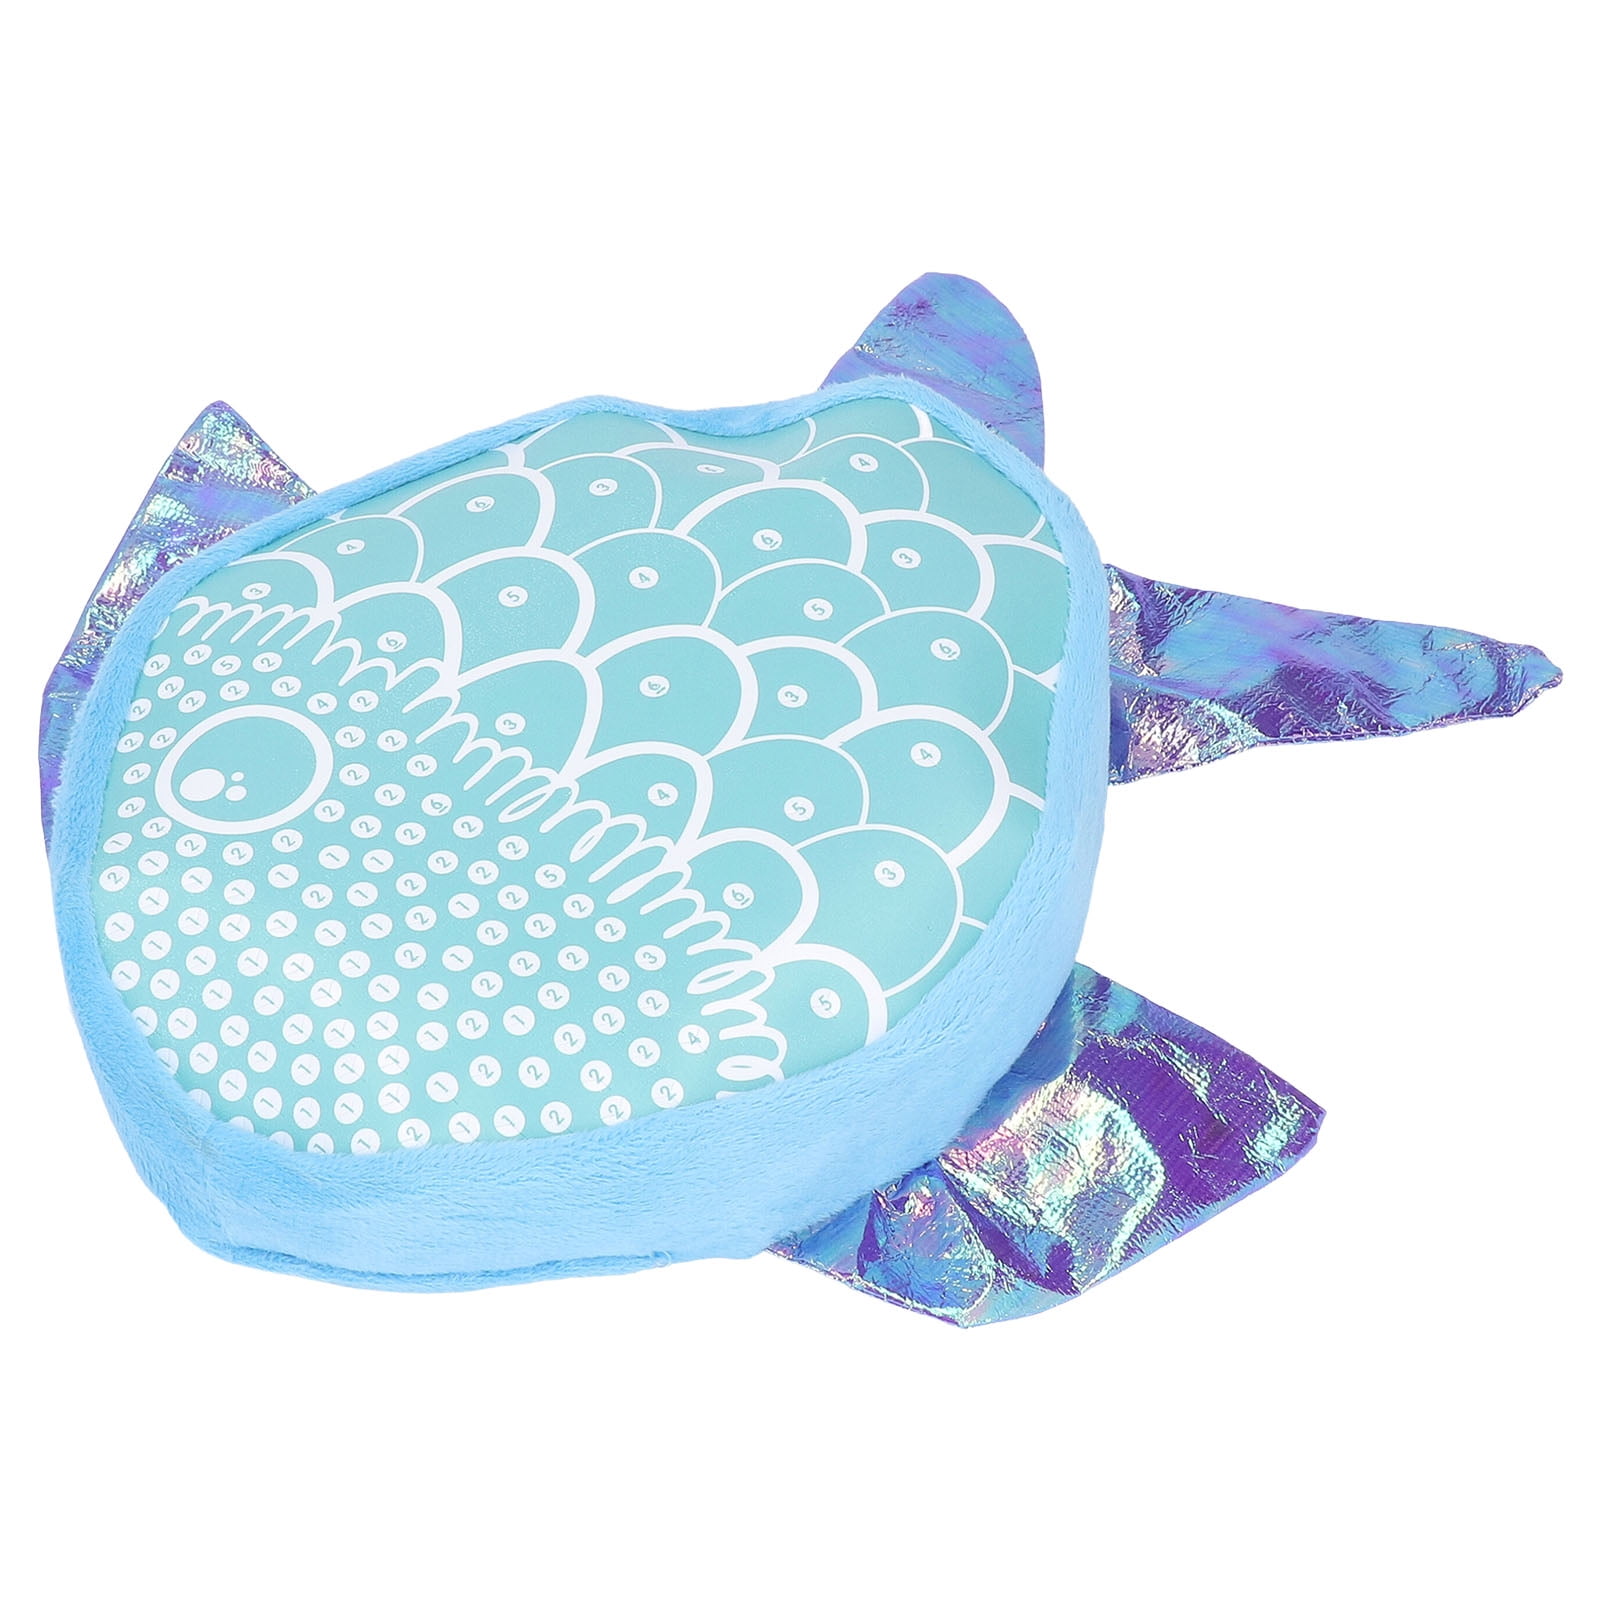 Plush Craft - Fish Pillow DIY brico bricolage crafts arts numbers create by